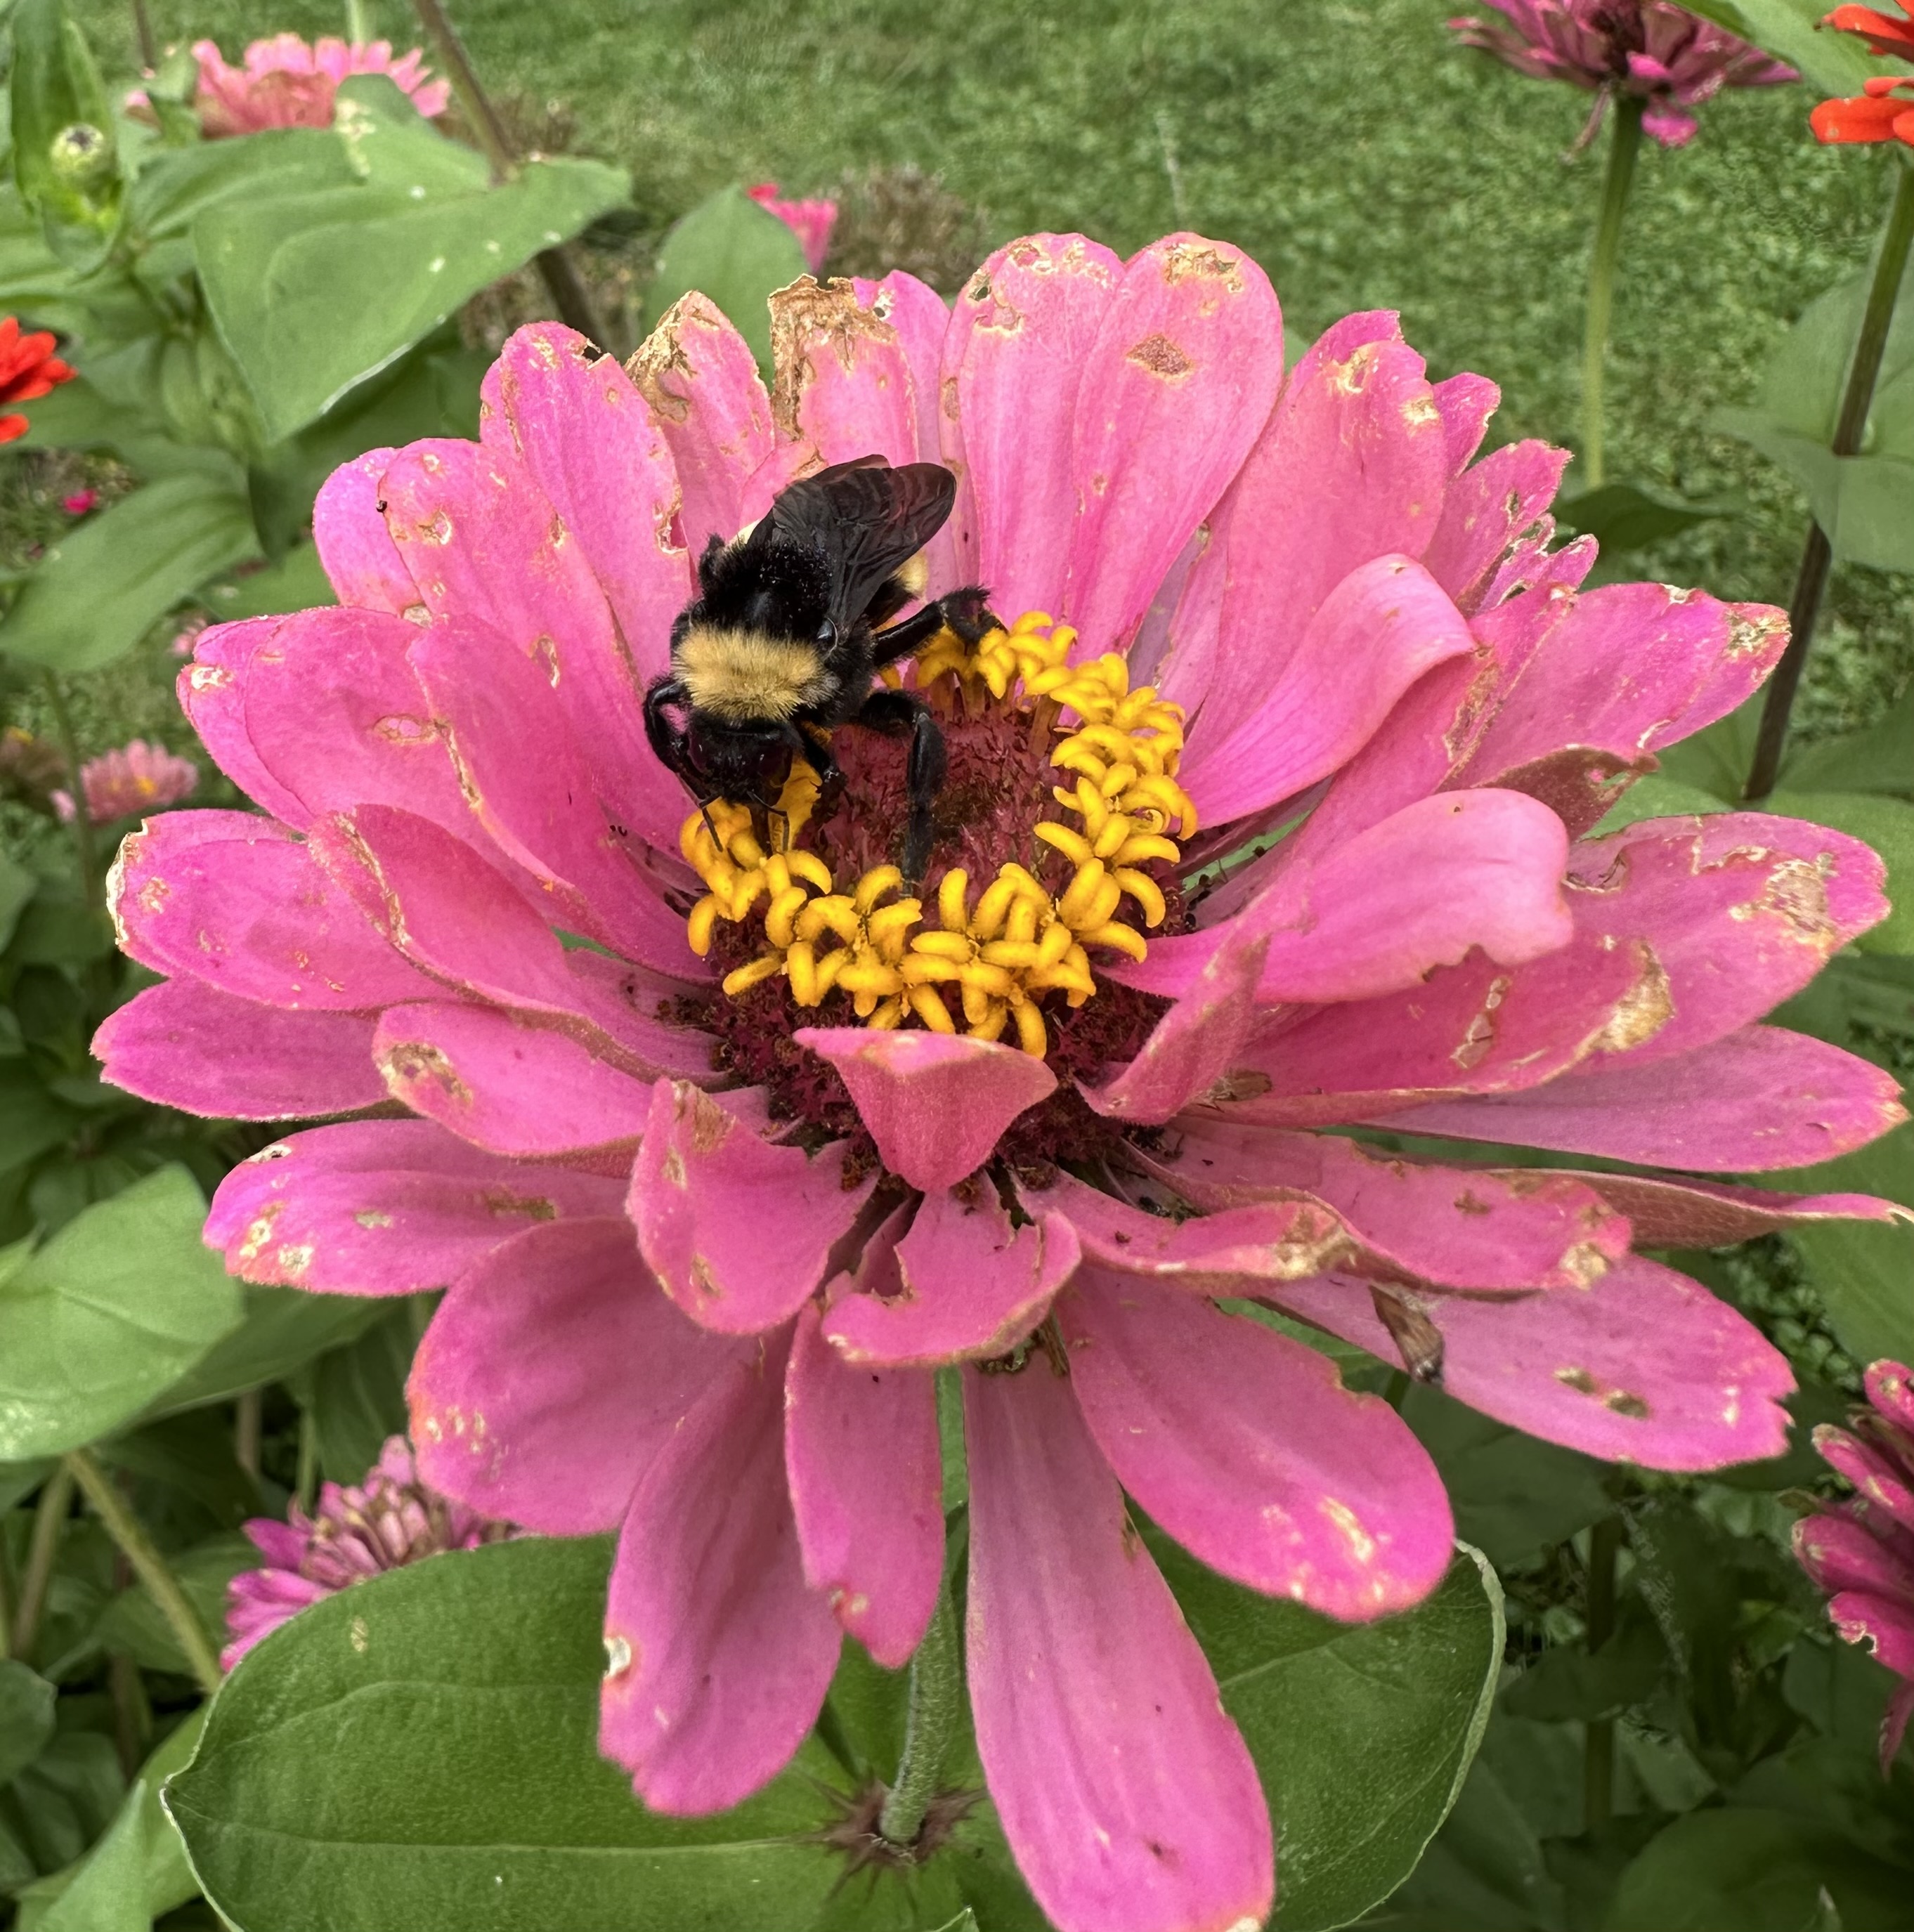 Bumble bee on a zinnia flower.